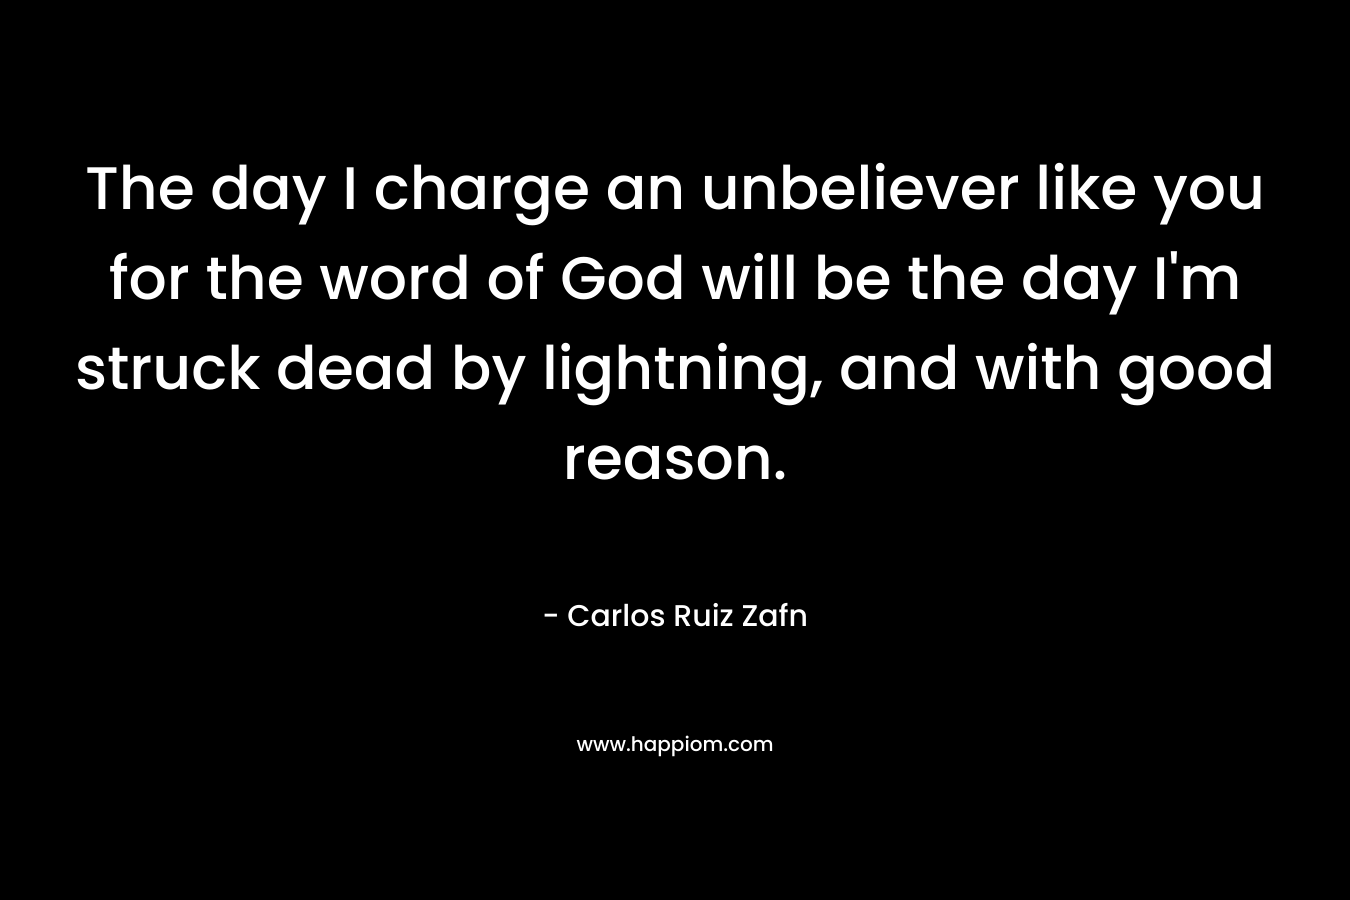 The day I charge an unbeliever like you for the word of God will be the day I'm struck dead by lightning, and with good reason.